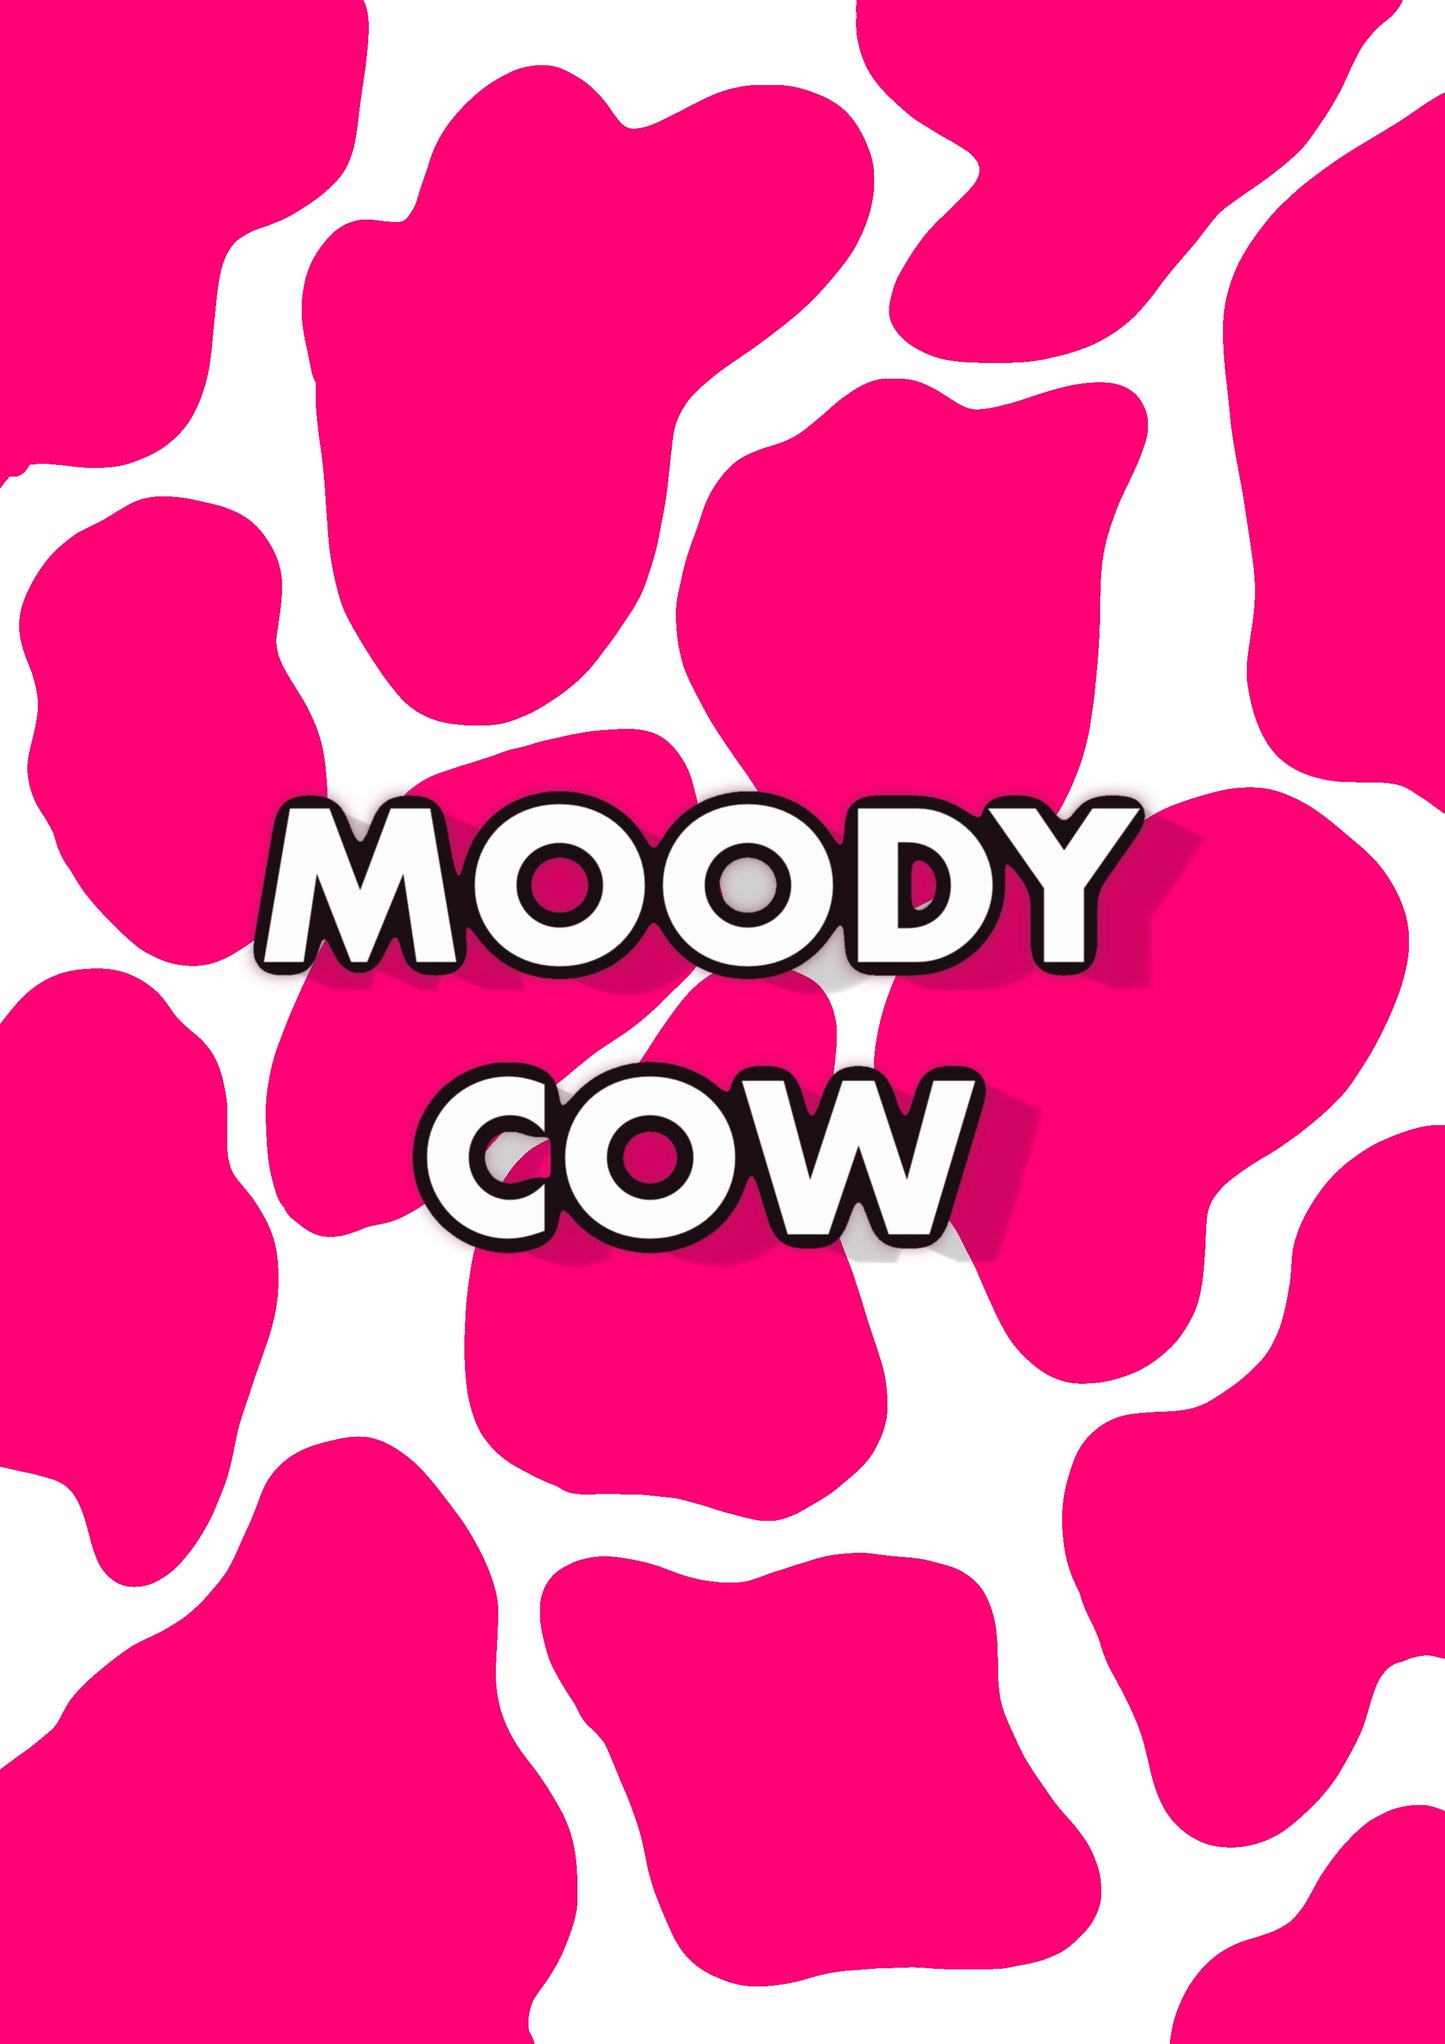 Moody Cow Pink Sassy Funny Typography Pattern Print